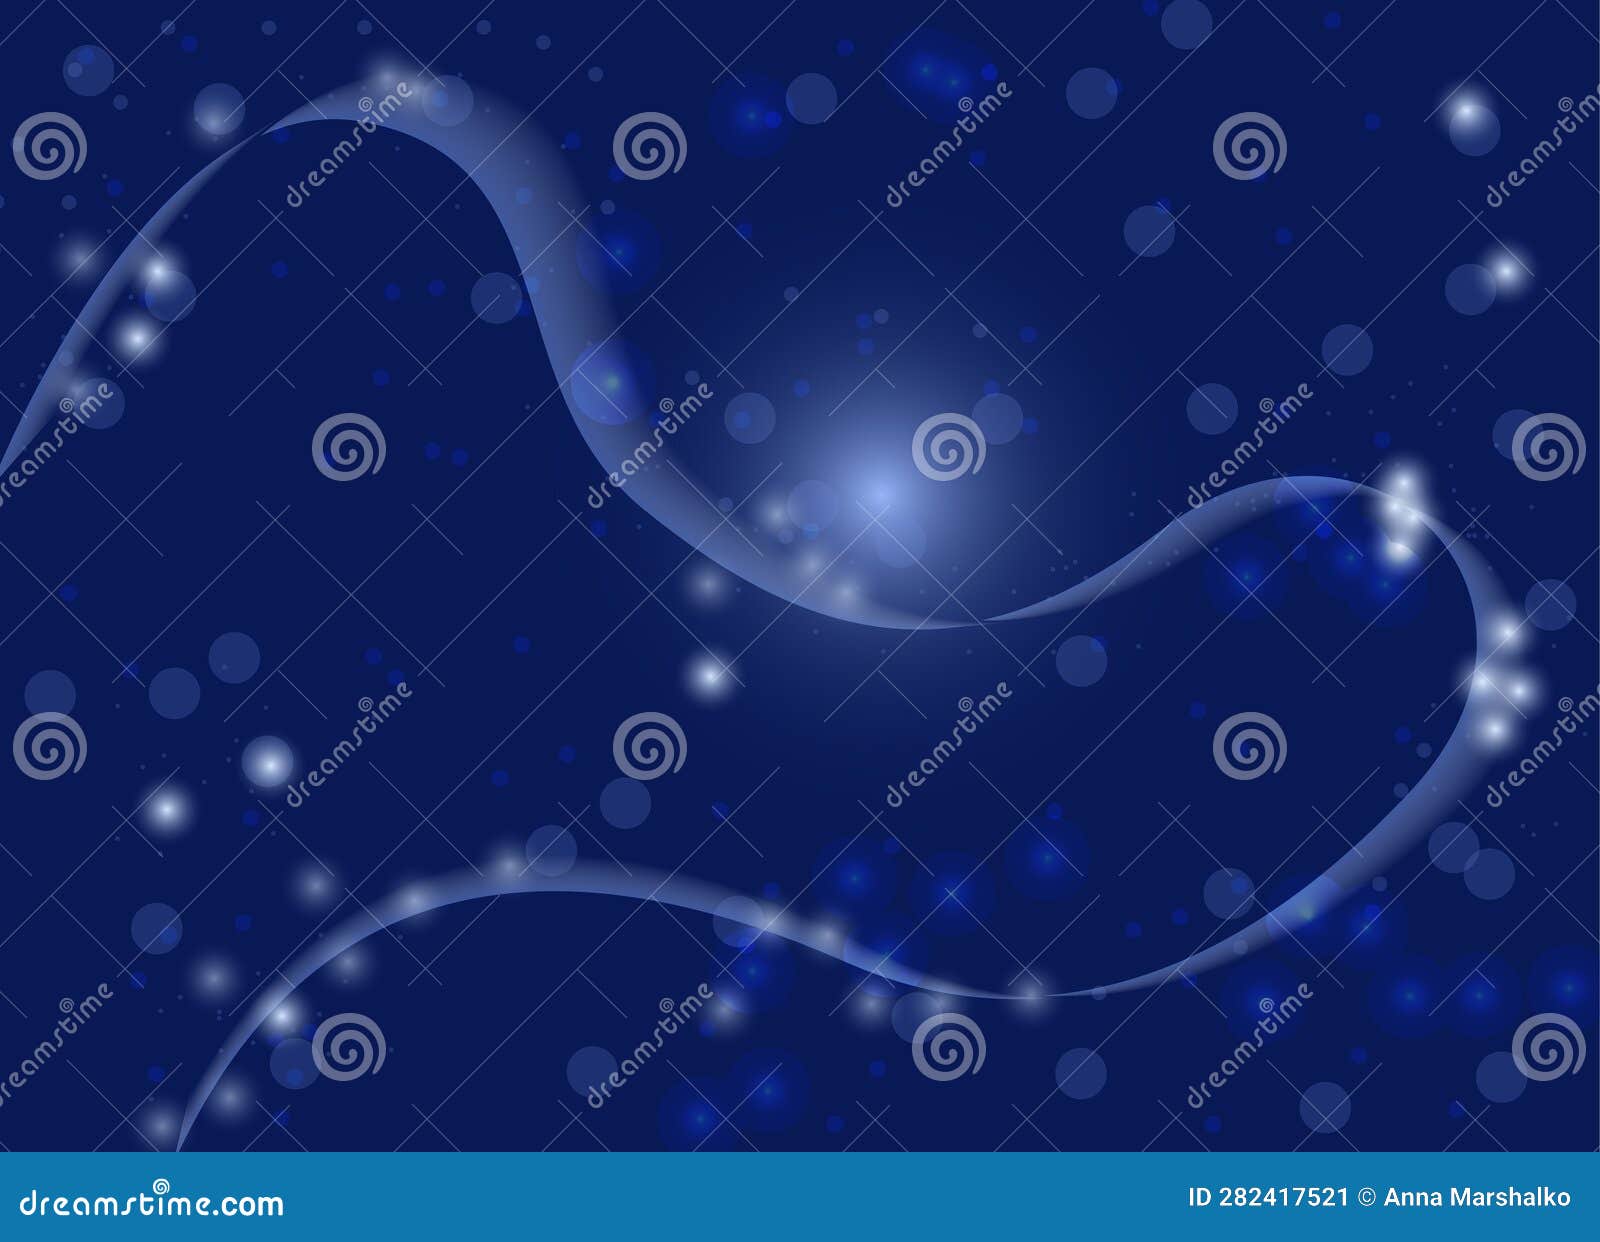 cosmic abstract gradiant background in dark blue colors.